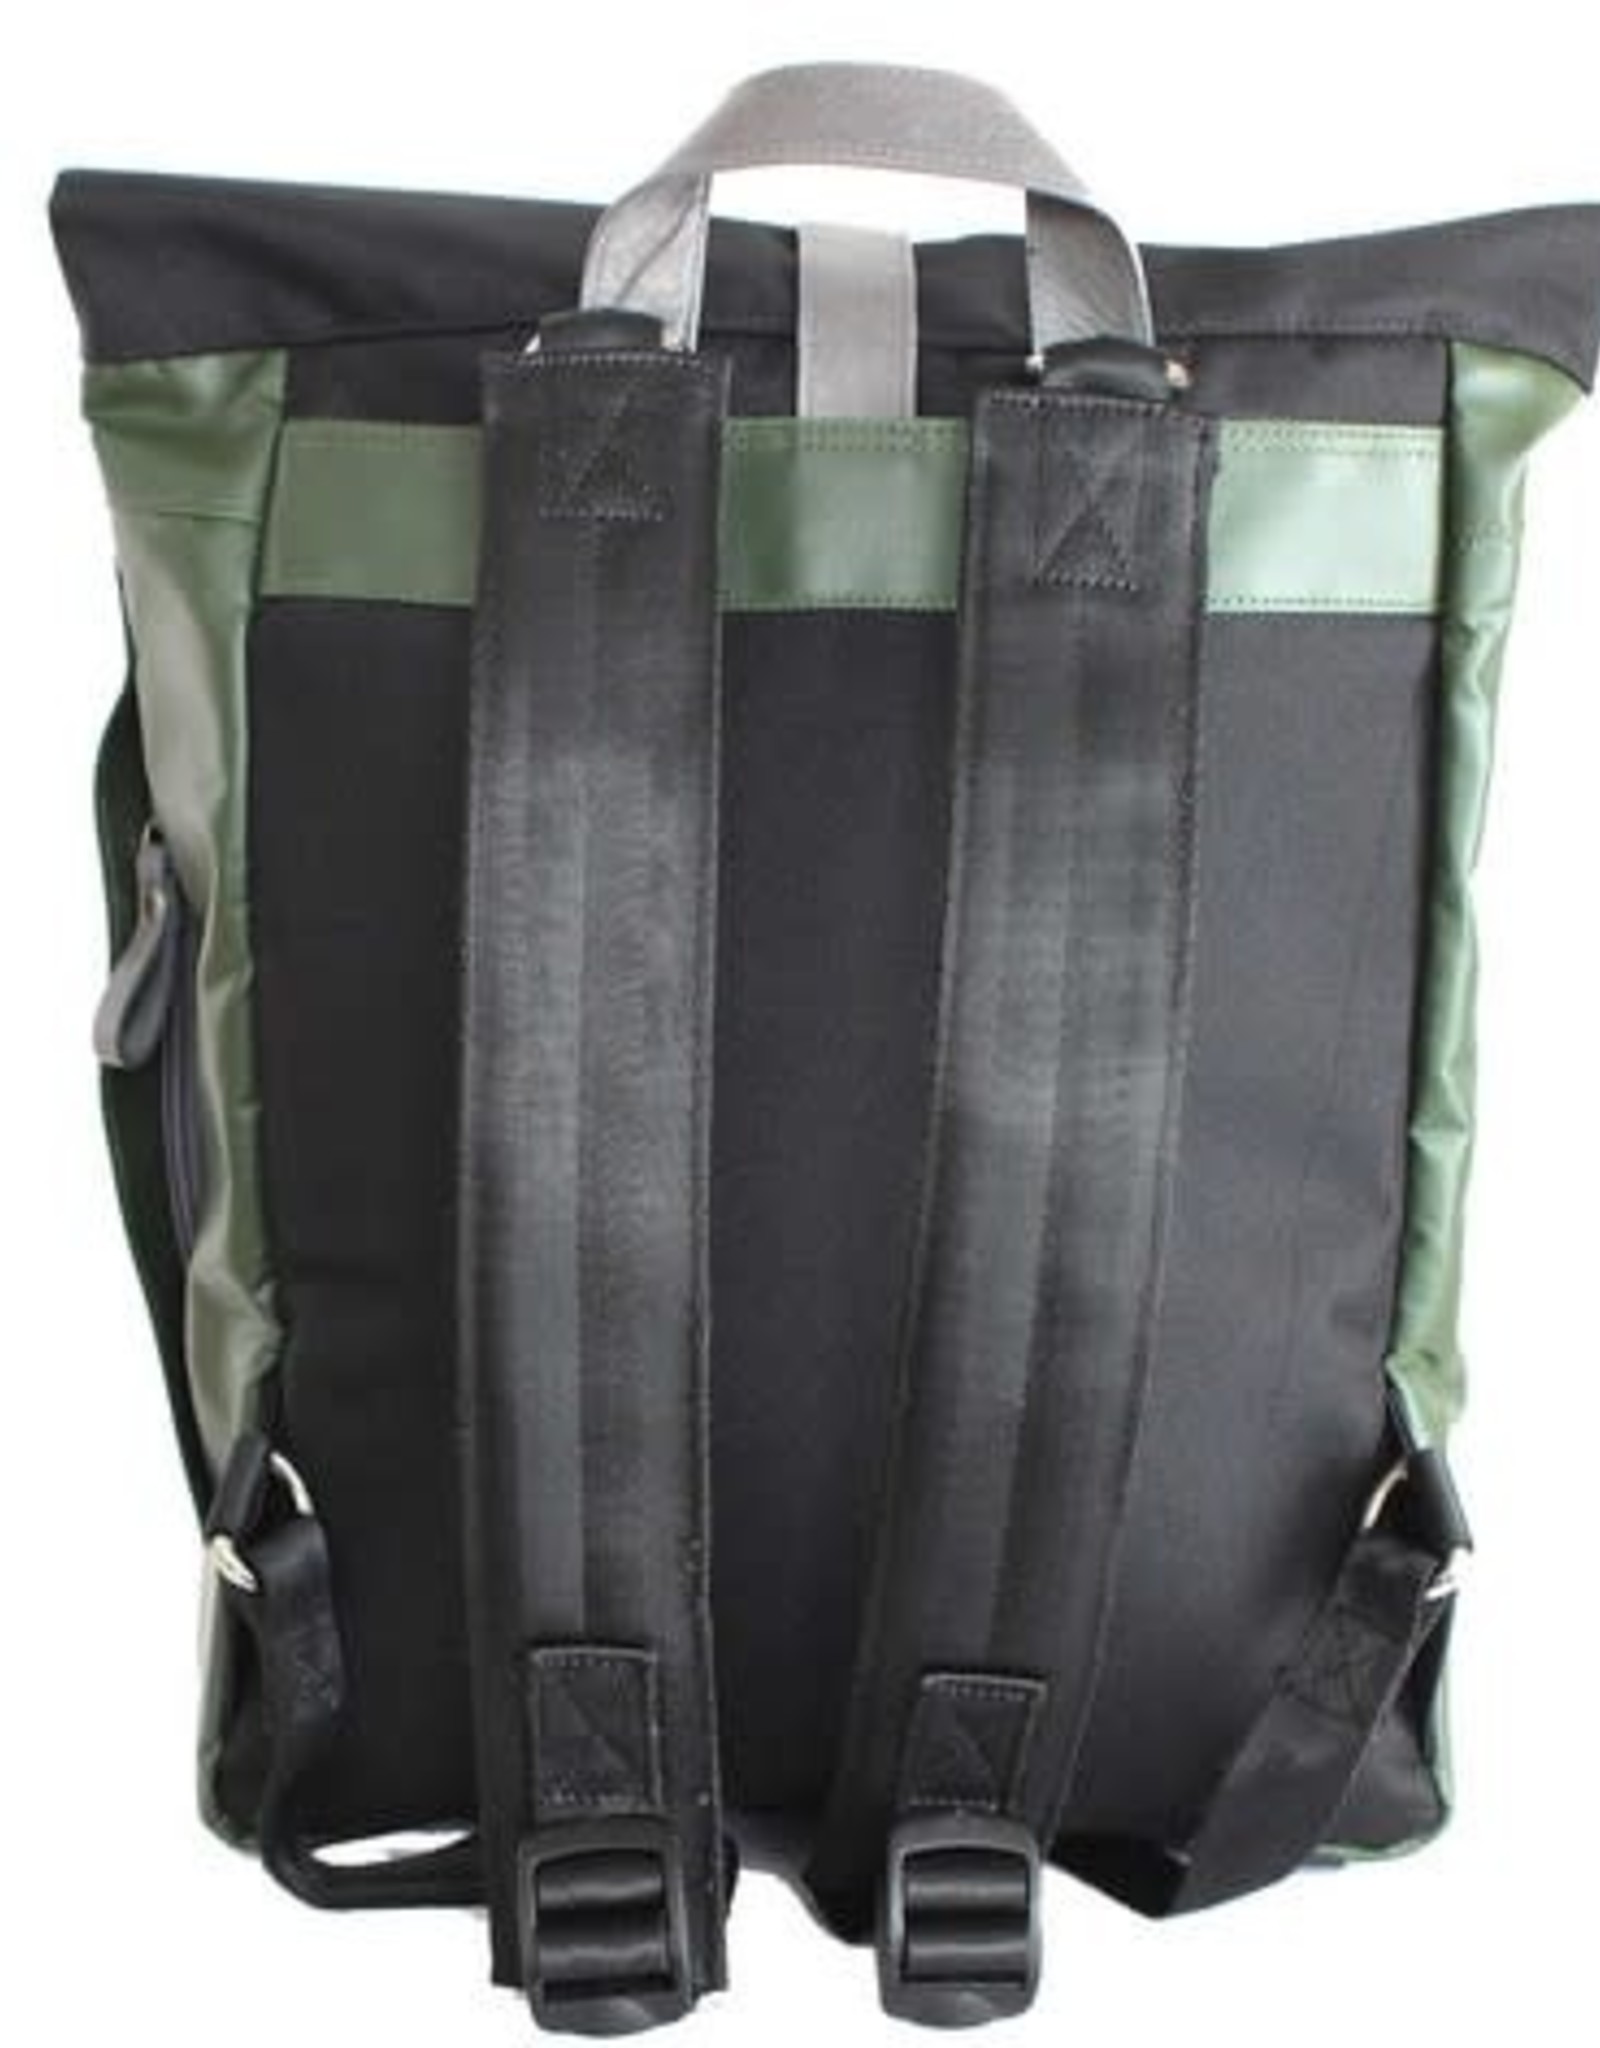 7clouds Sowe Laptop Backpack - 4 color choices